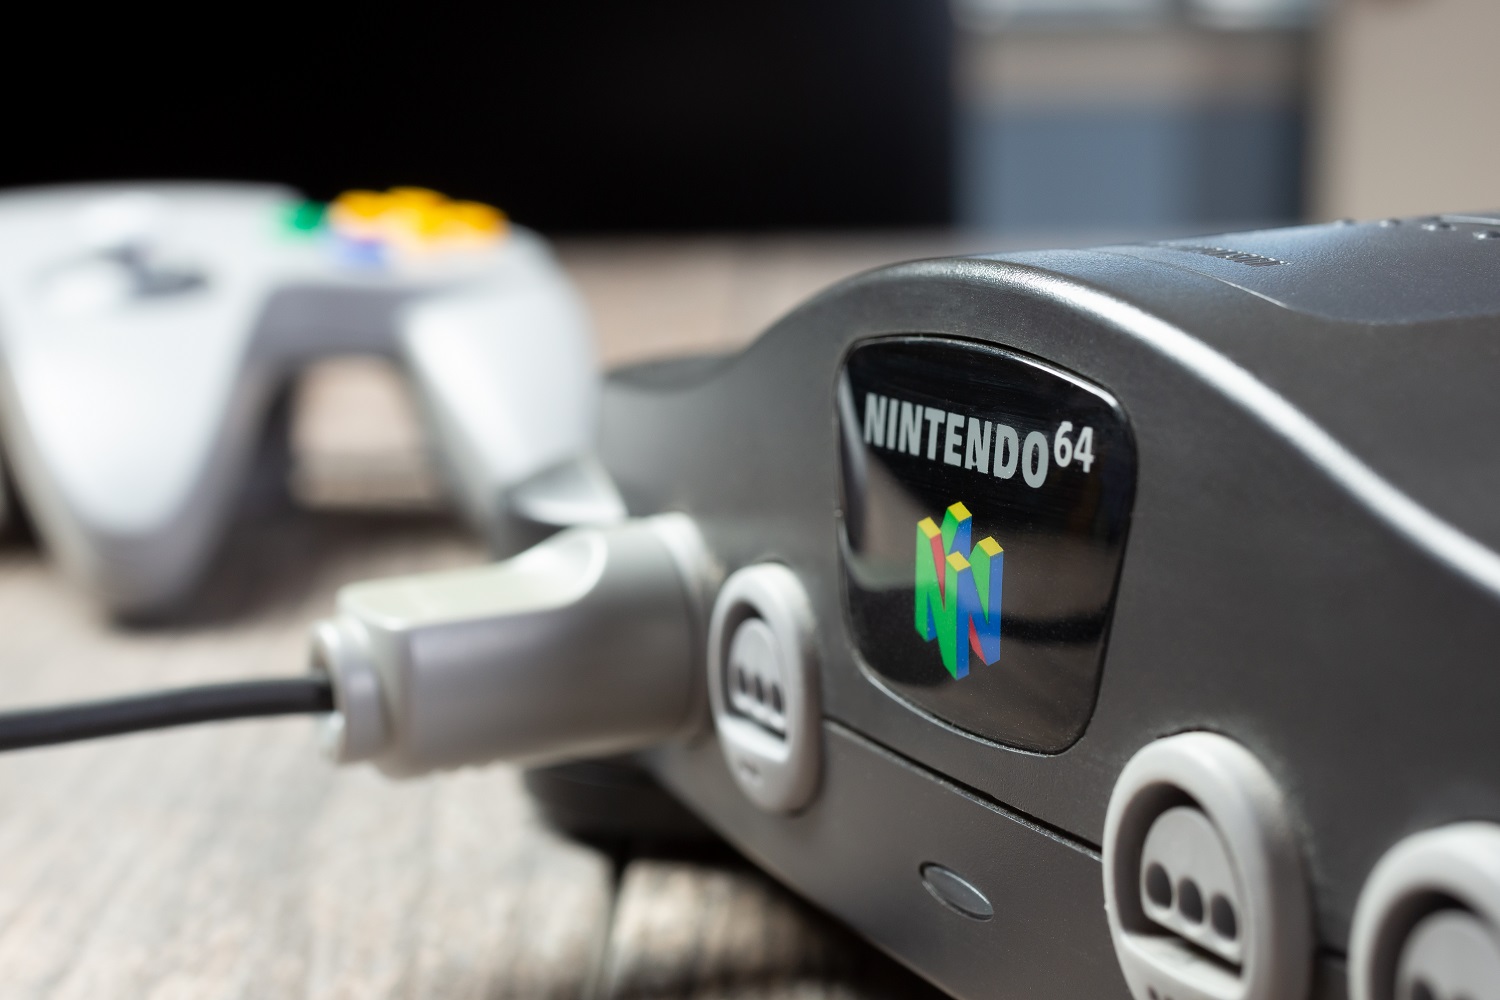 Analogue Pocket creators just announced the N64 console of my dreams